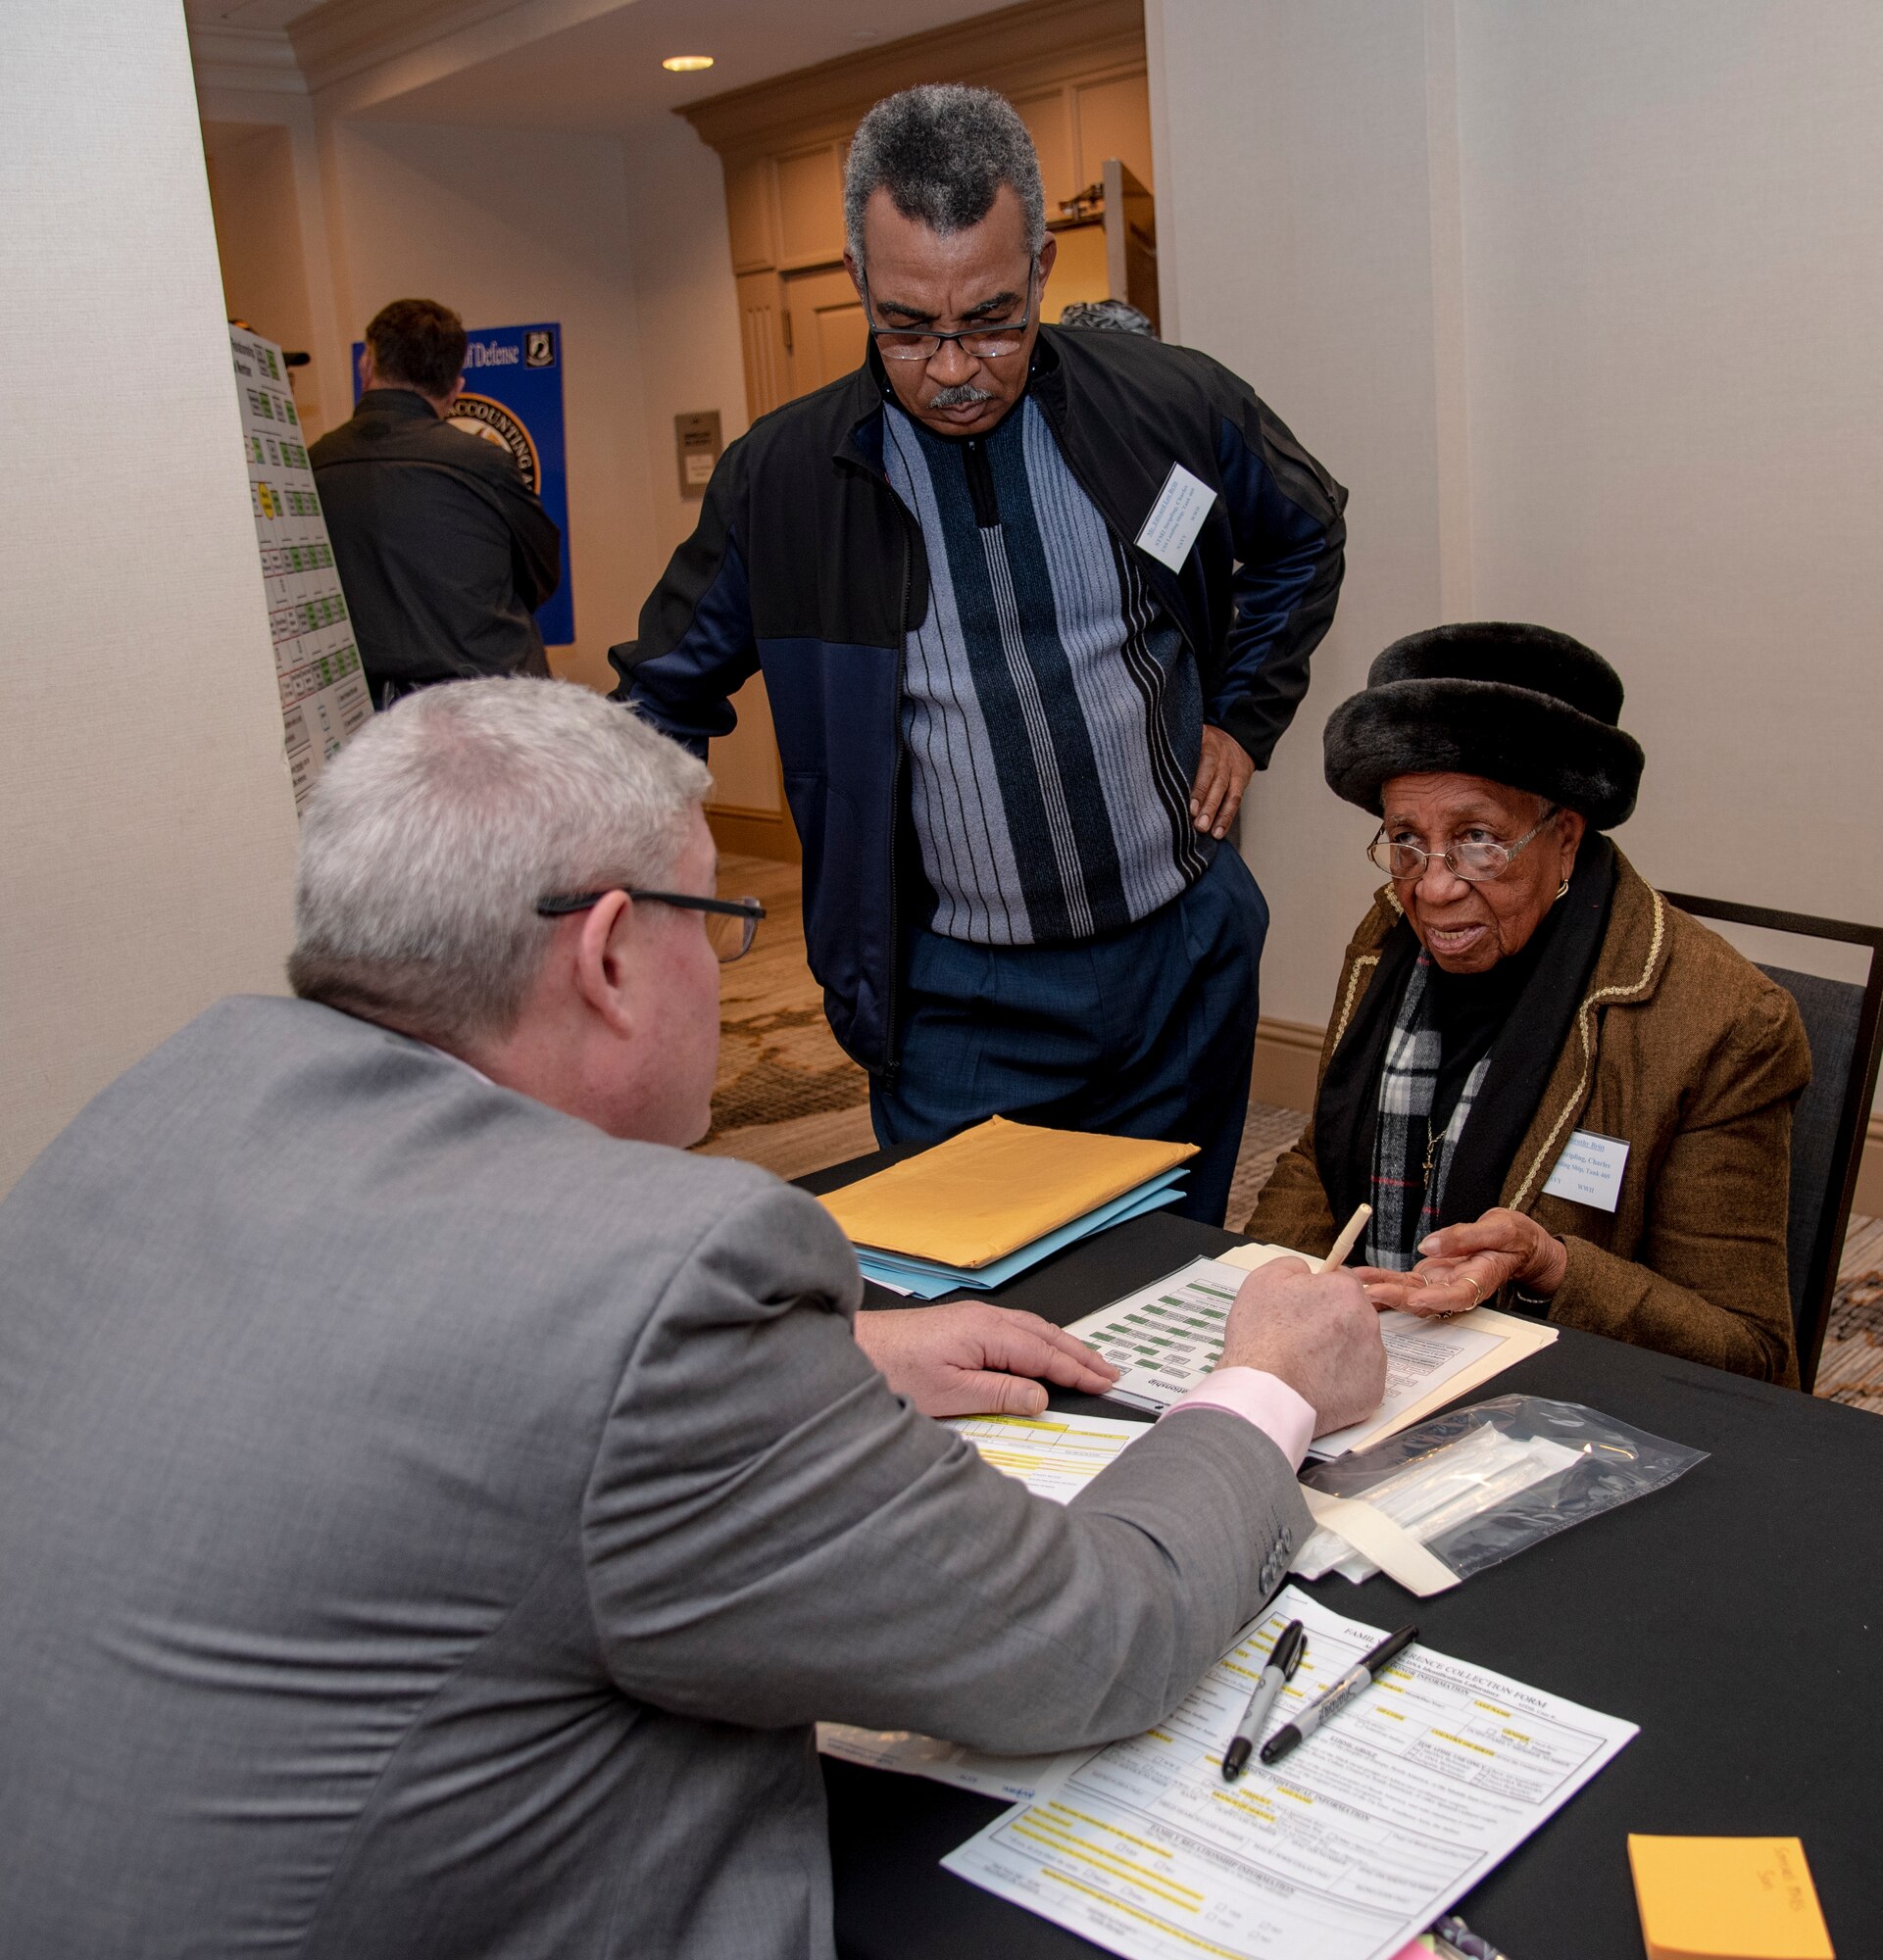 Dr. Tim McMahon (left), Armed Forces Medical Examiner System Department of Defense DNA Operations director, talks with Dorothy Britt, about family reference sample to see if she is eligible to donate DNA during a family member update in Birmingham, Alabama, January 26, 2019. The Defense POW/MIA Accounting Agency conducts periodic and annual government briefings for families of service members who are missing in action. These events are designed to keep family members informed of those still missing and to discuss in detail the latest information available about their specific case. (U.S. Air Force photo by Staff Sgt. Nicole Leidholm)